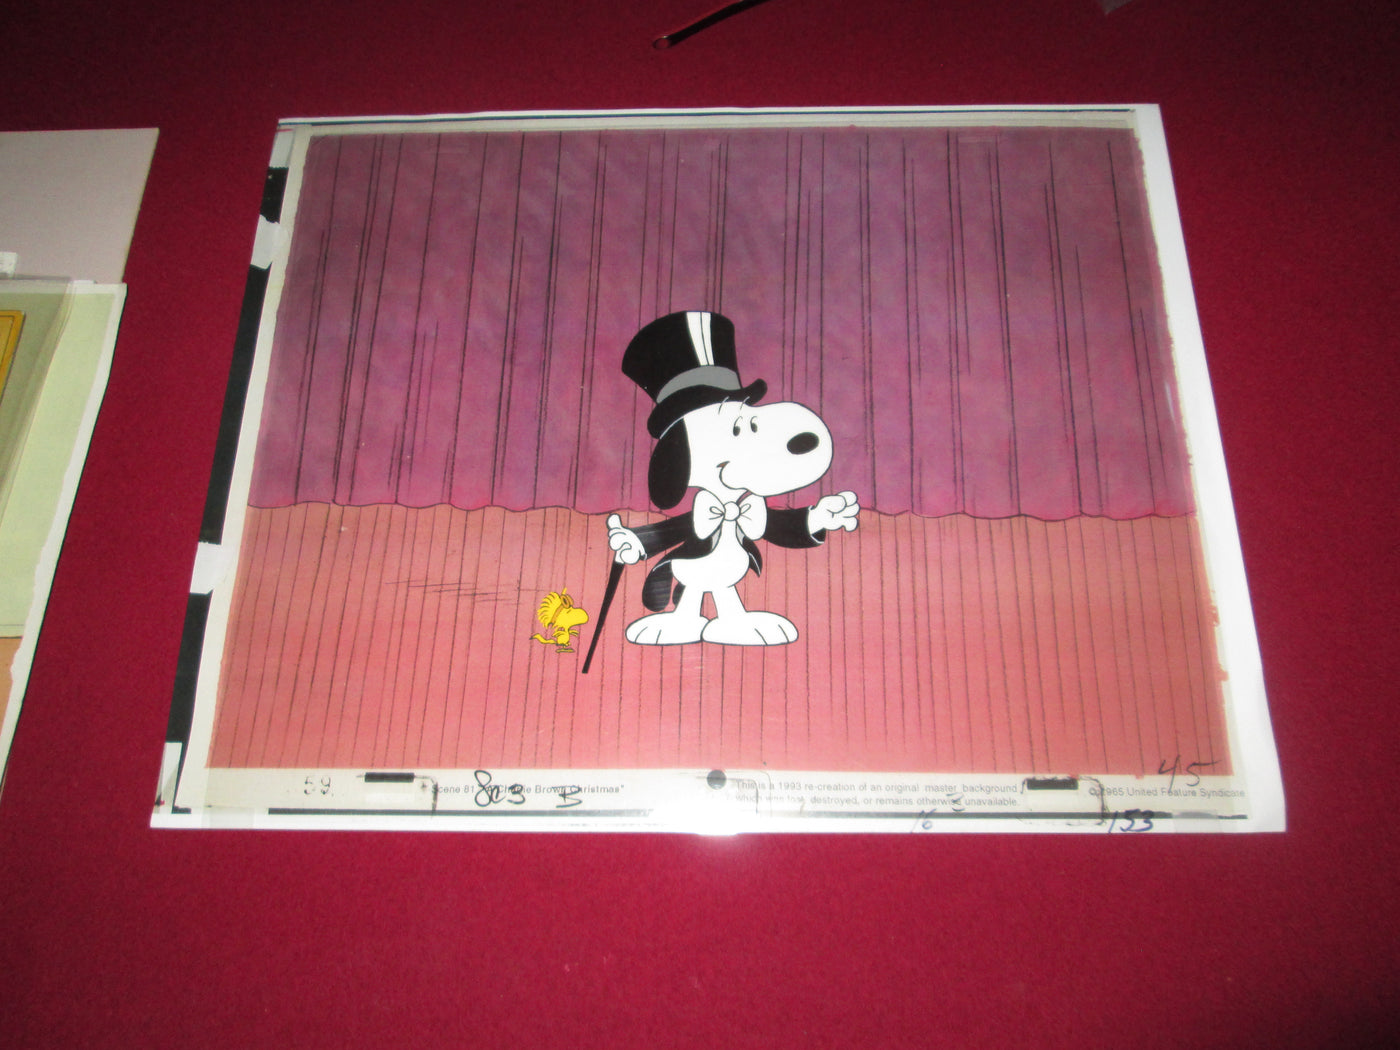 Original Peanuts Production Cel of Snoopy and Woodstock from Snoopy the Musical (1988)